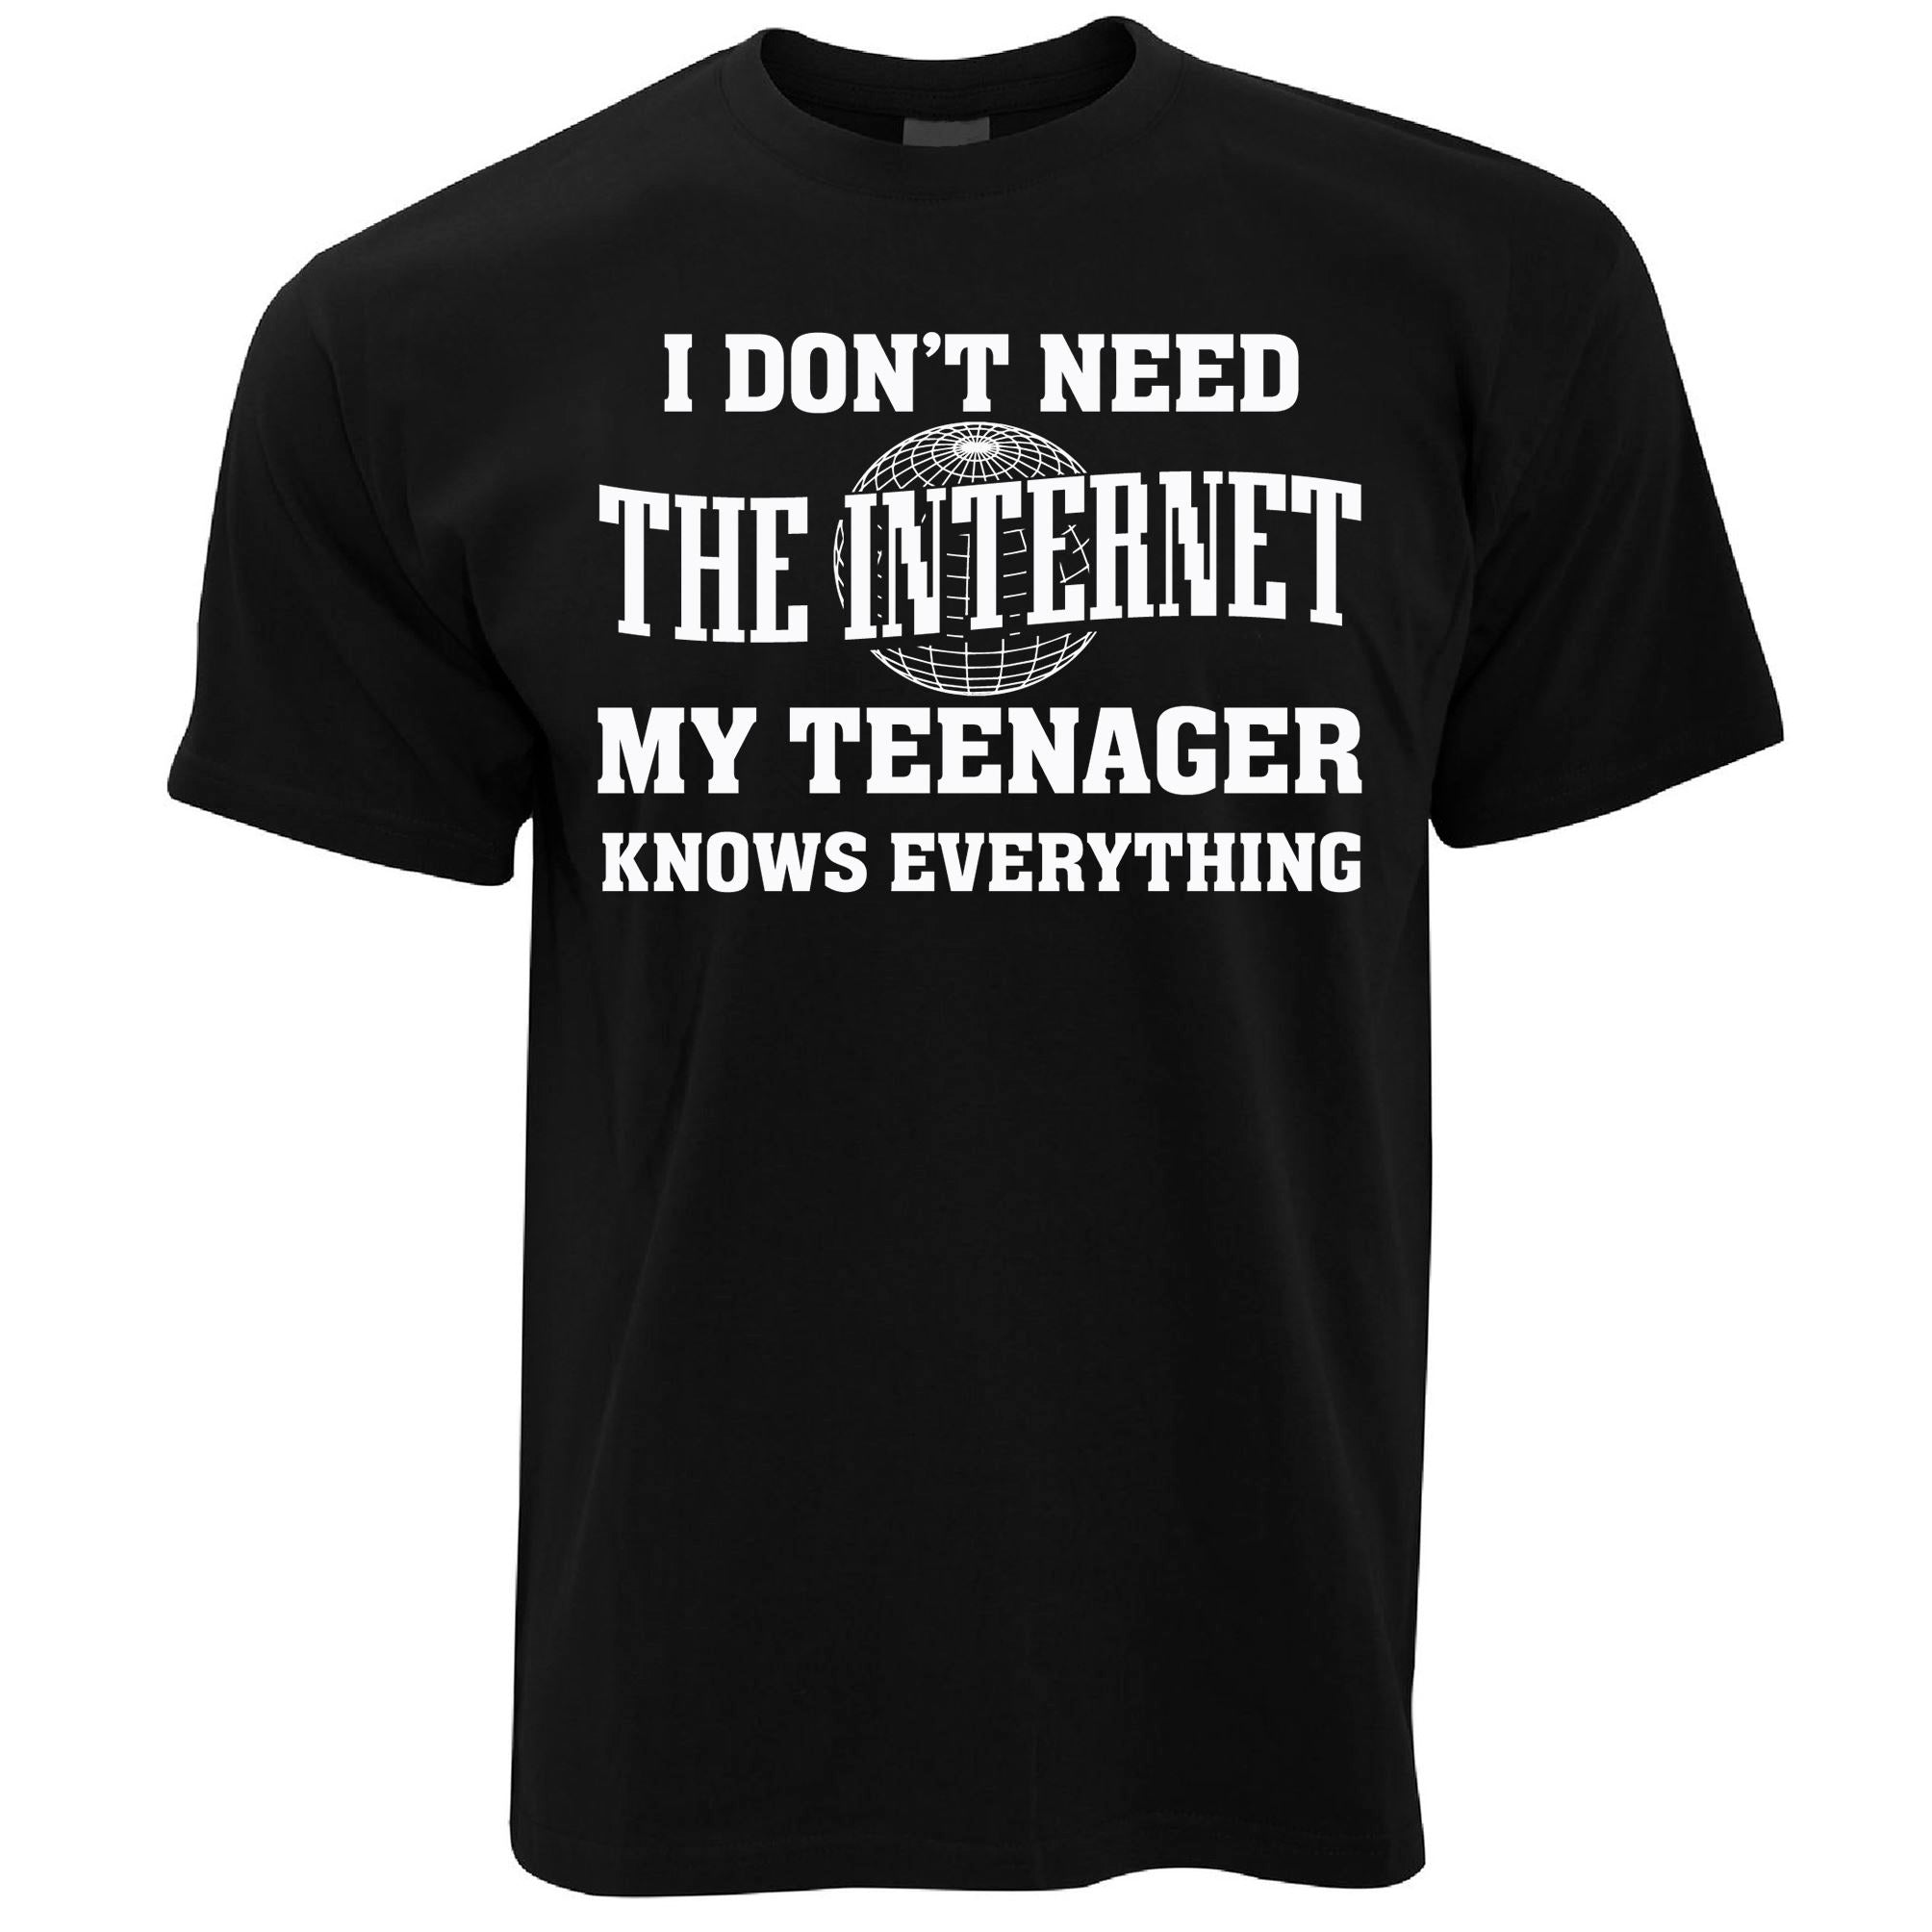 Don't Need The Internet T Shirt Teenager Knows Everything